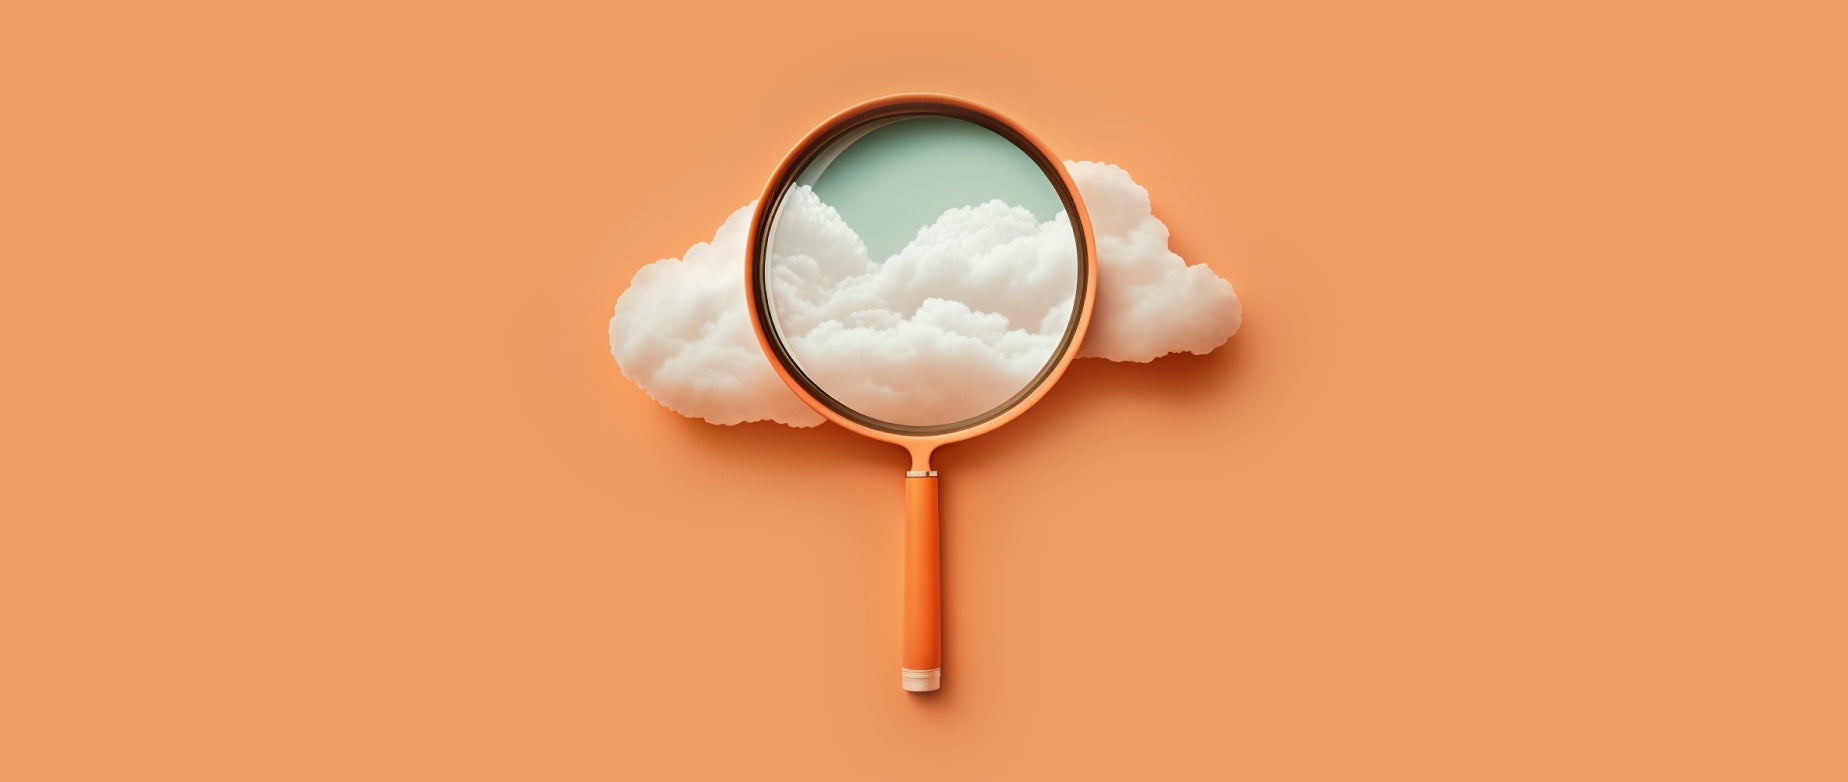 magnifying glass on cloud: on page seo